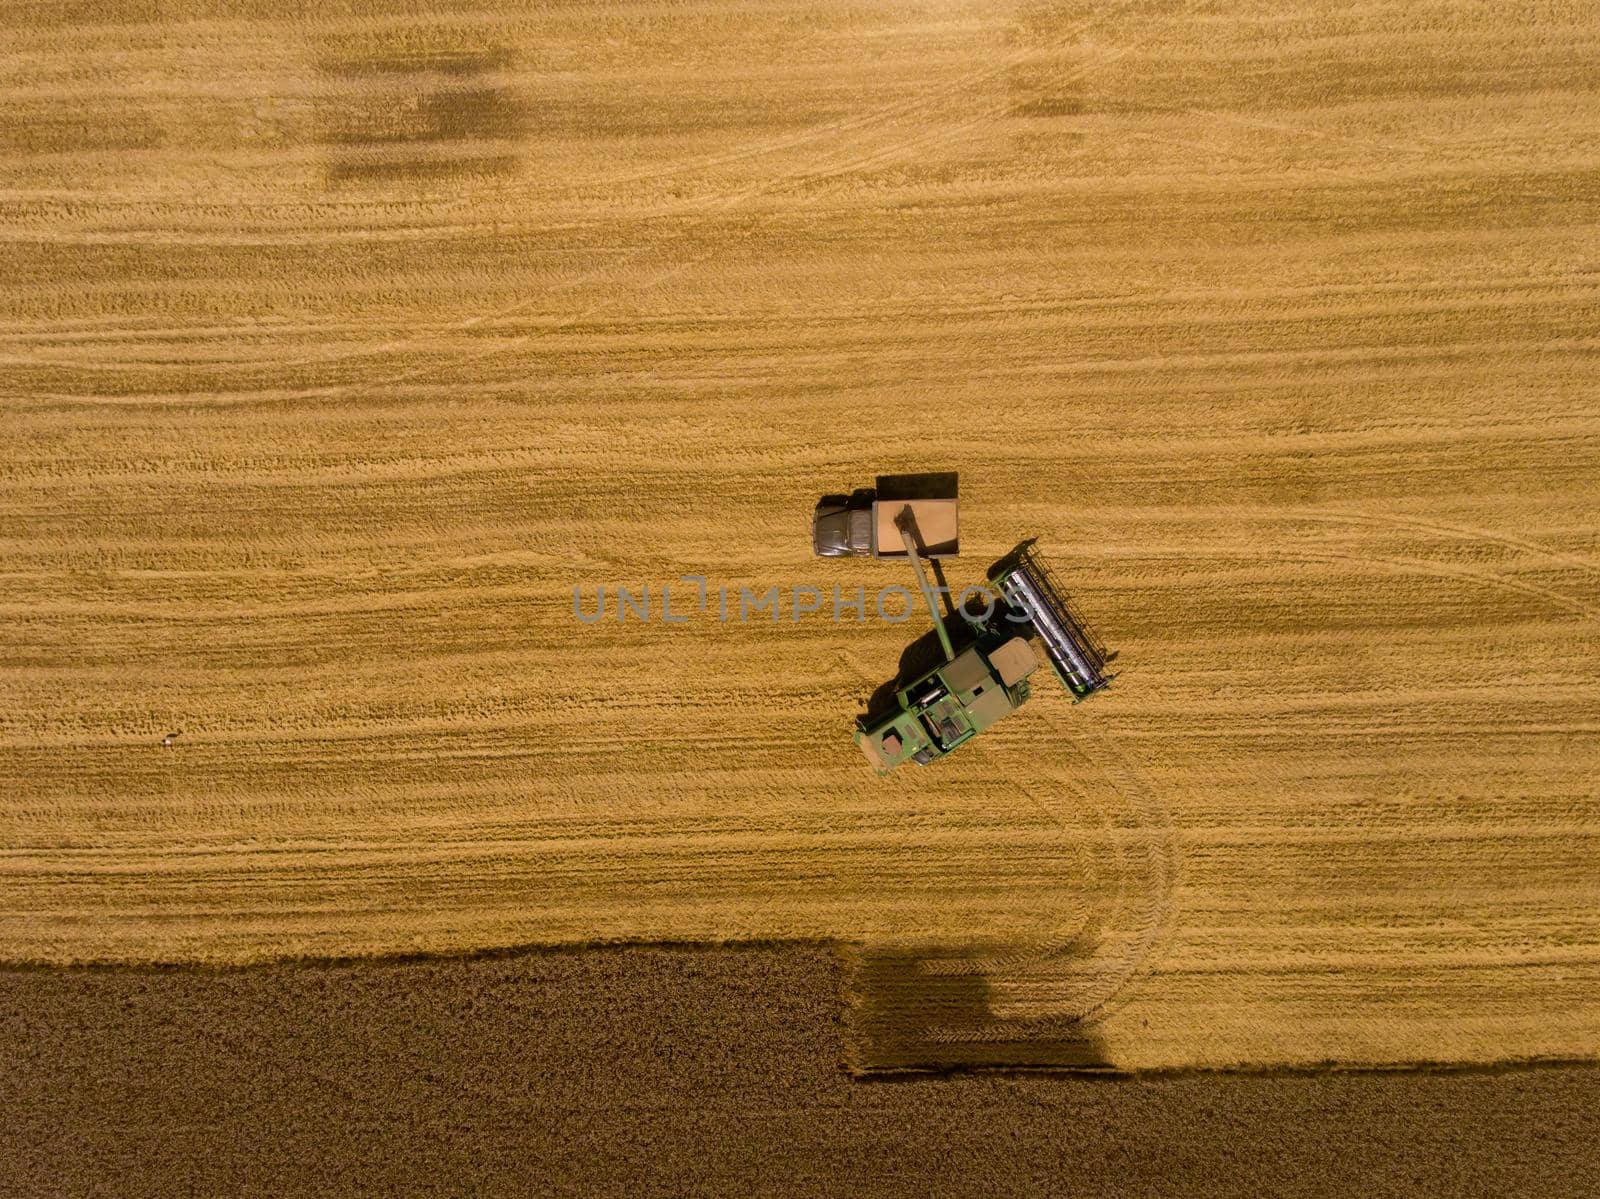 Harvester machine working in field. Aerial view. Top view. by leonik